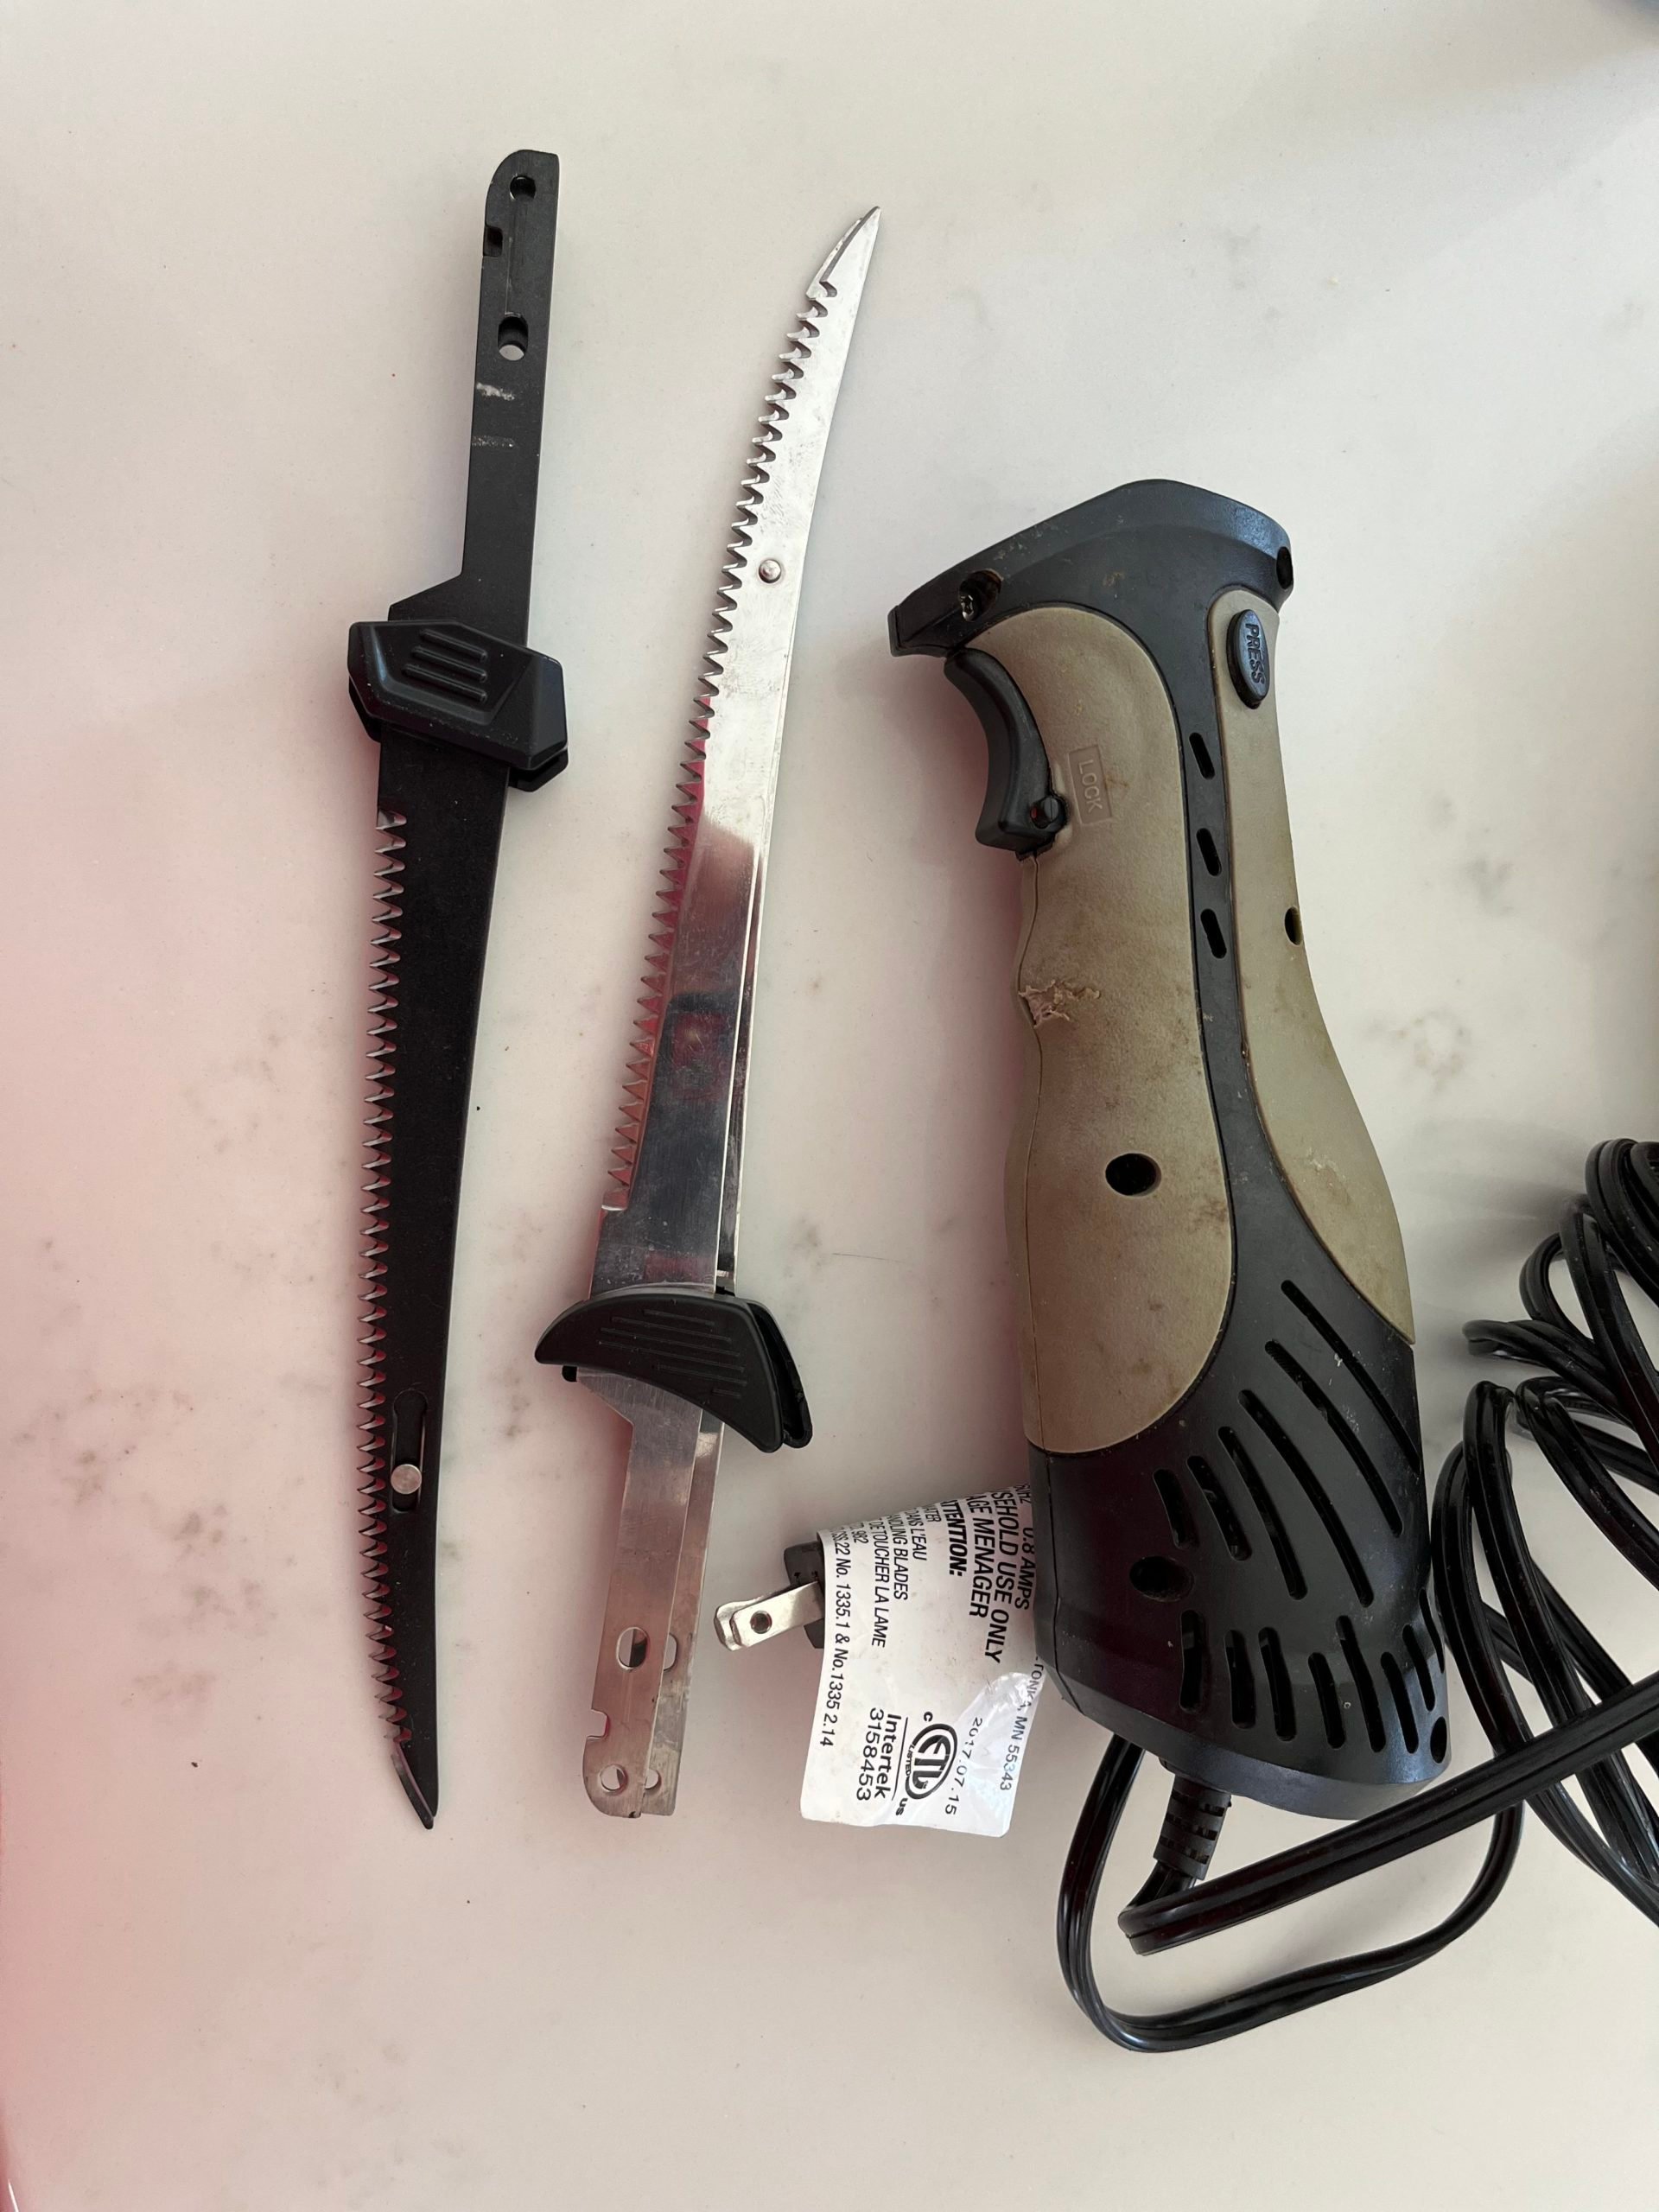 Rapala electric fillet knife. - Classified Ads - Classified Ads